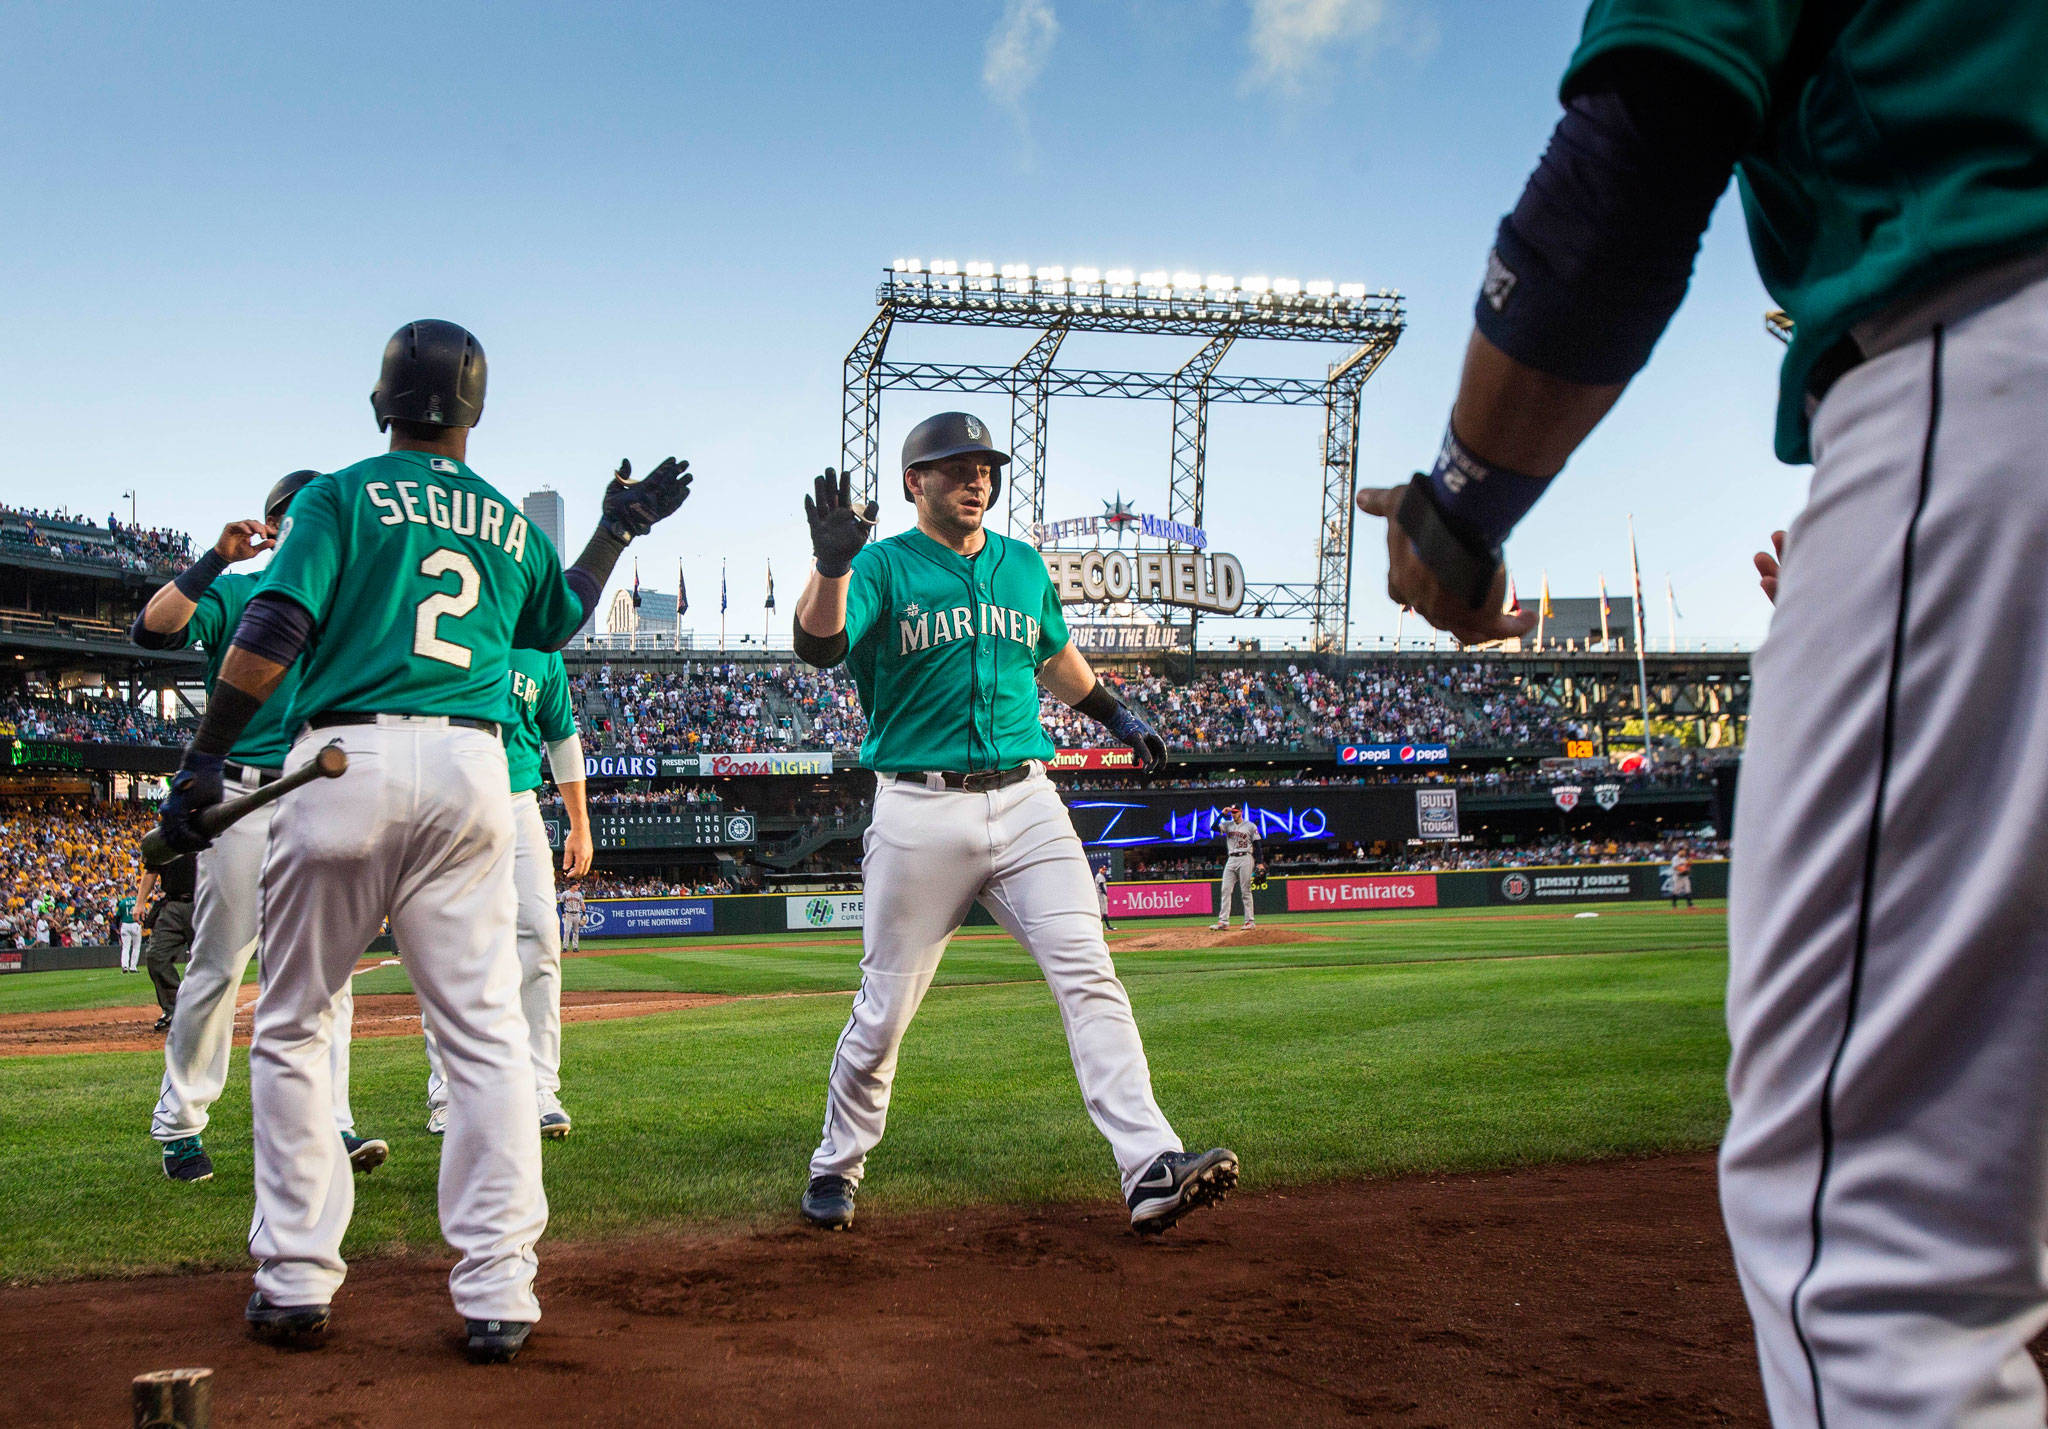 Since hitting rock bottom in Boston, the Mariners have surged at the plate and in the standings